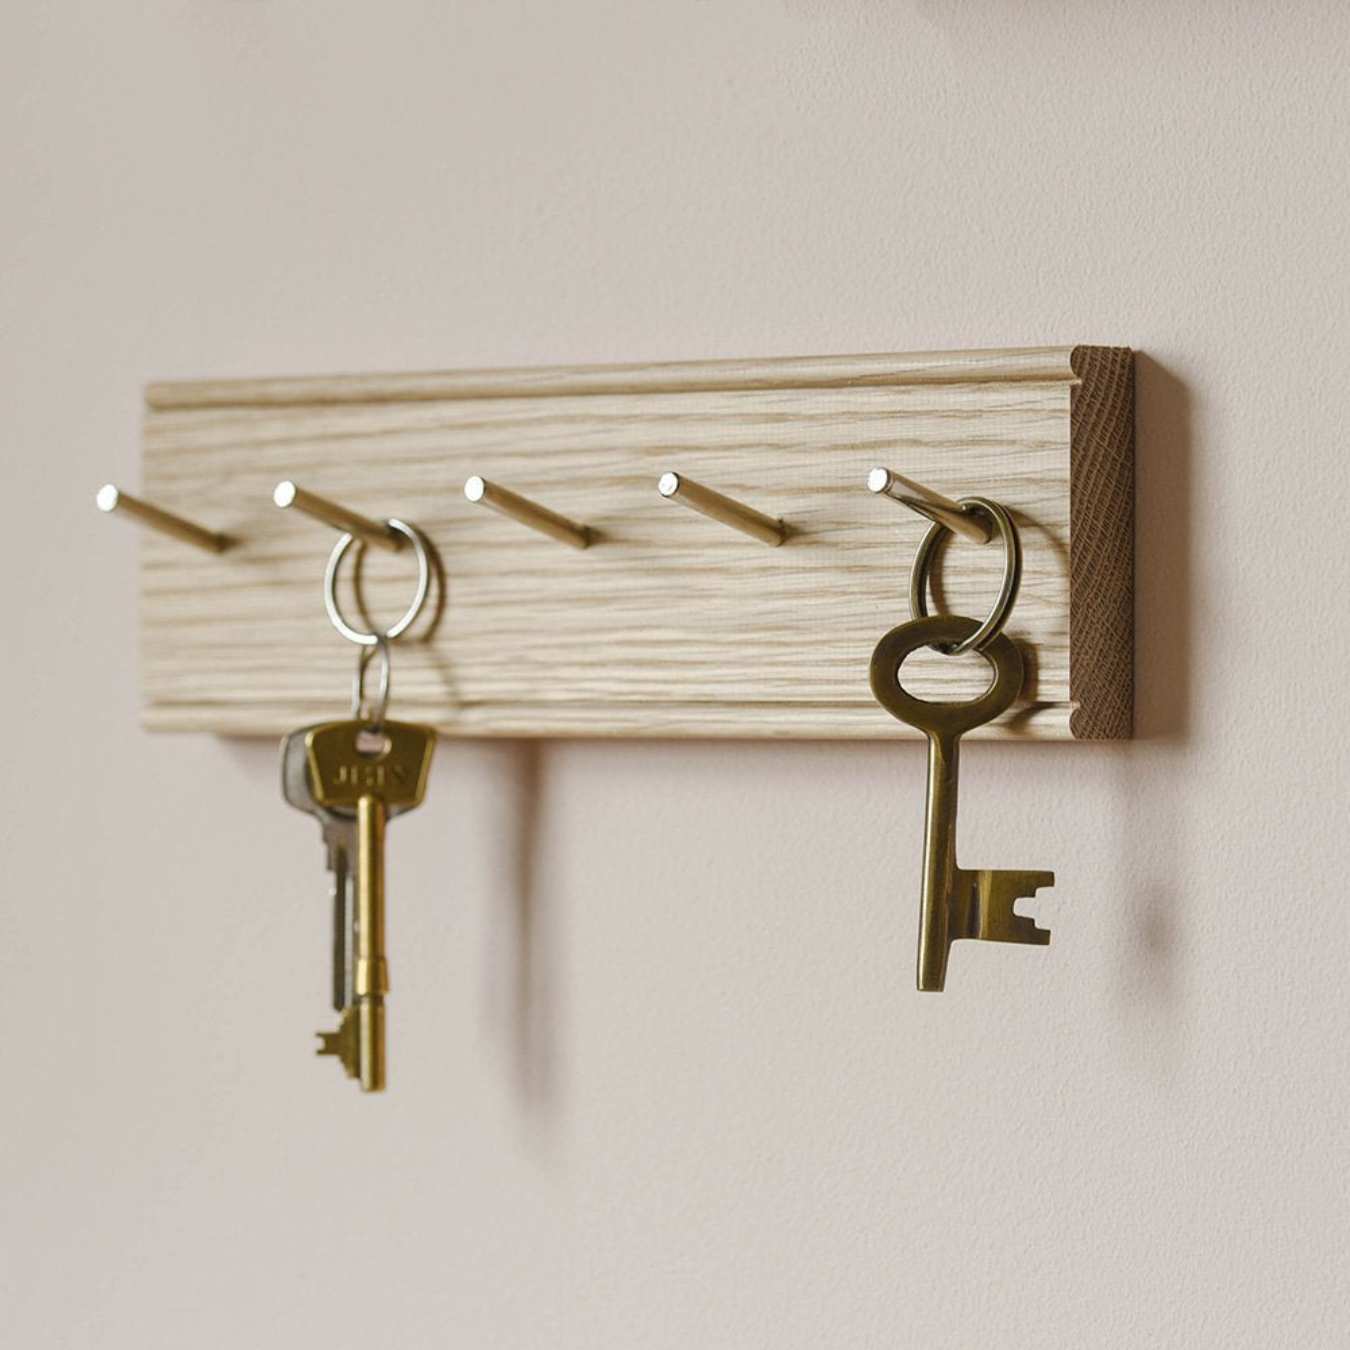 The Perfect Key Rack for Her: A Must-Have Organizer for Women